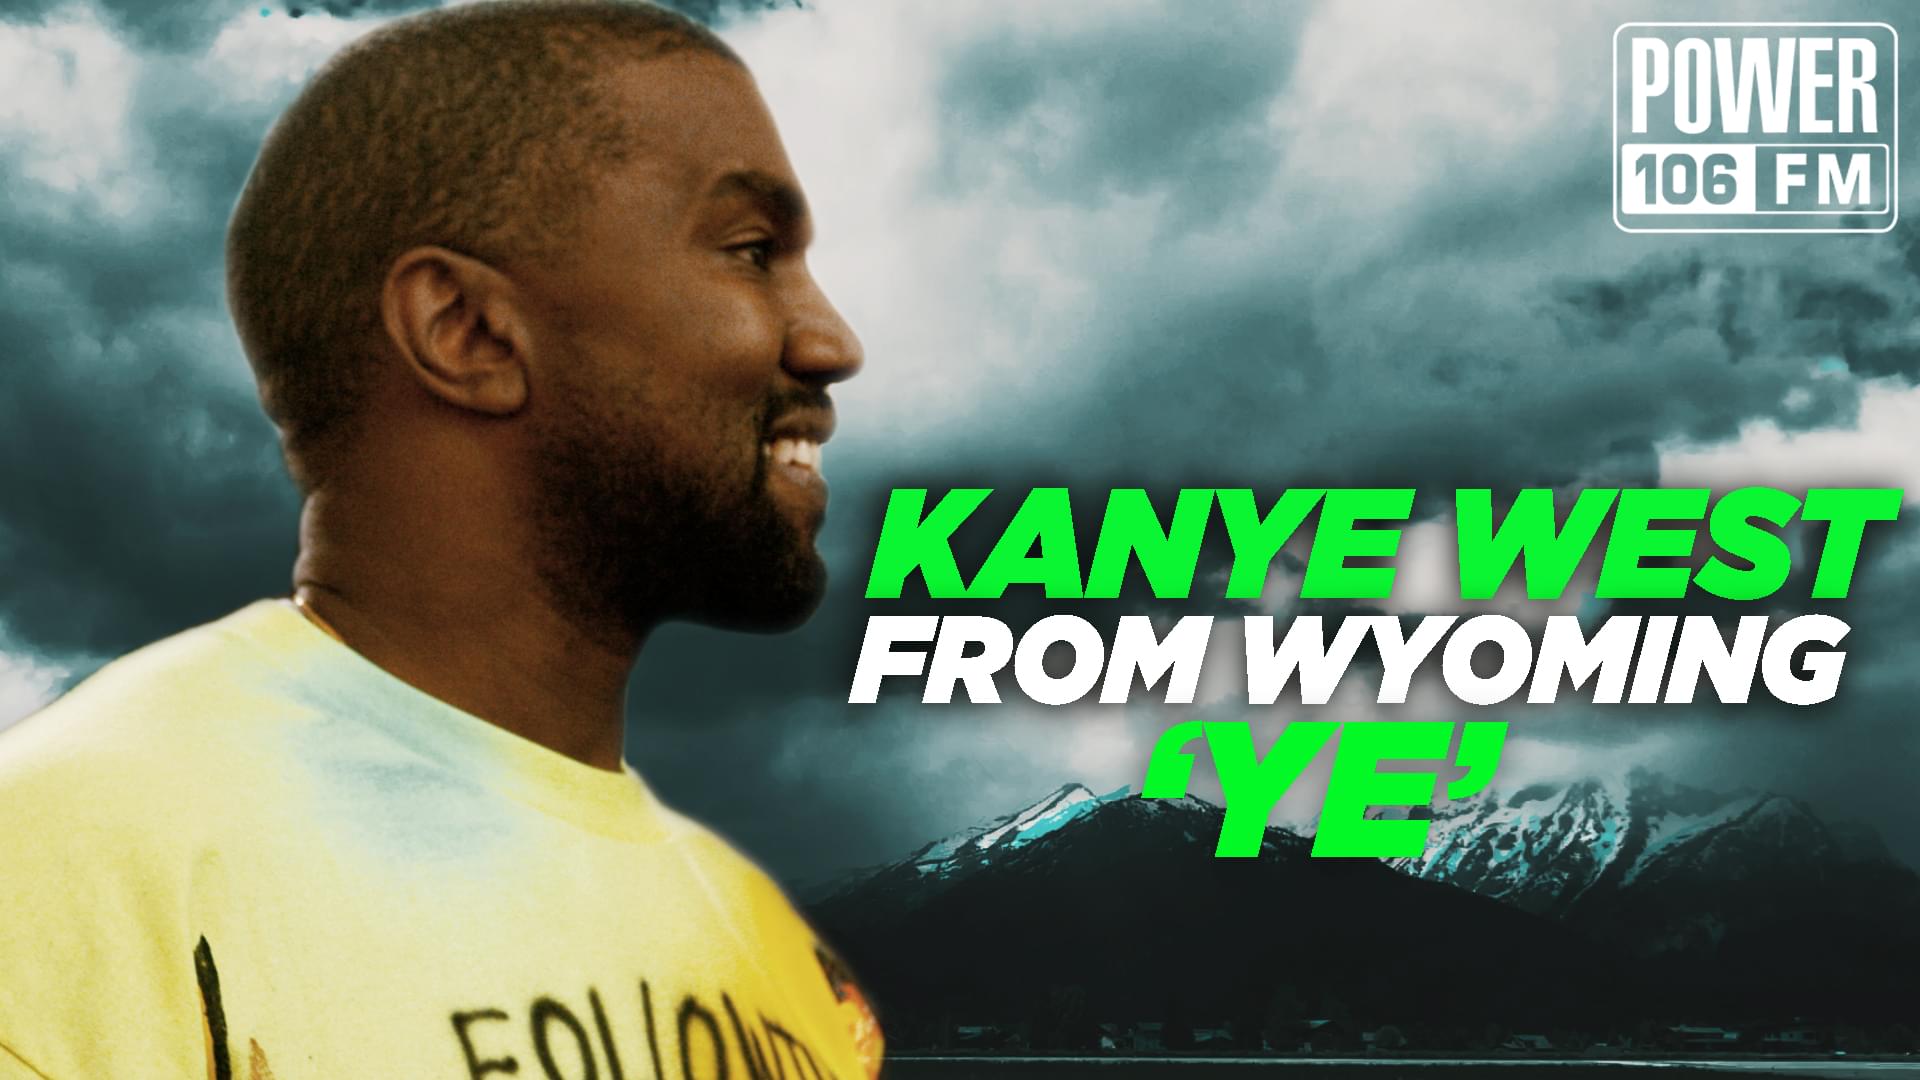 Kanye West On Redoing The Album ‘YE’ After TMZ Interview, Future Projects + Family Love [WATCH]